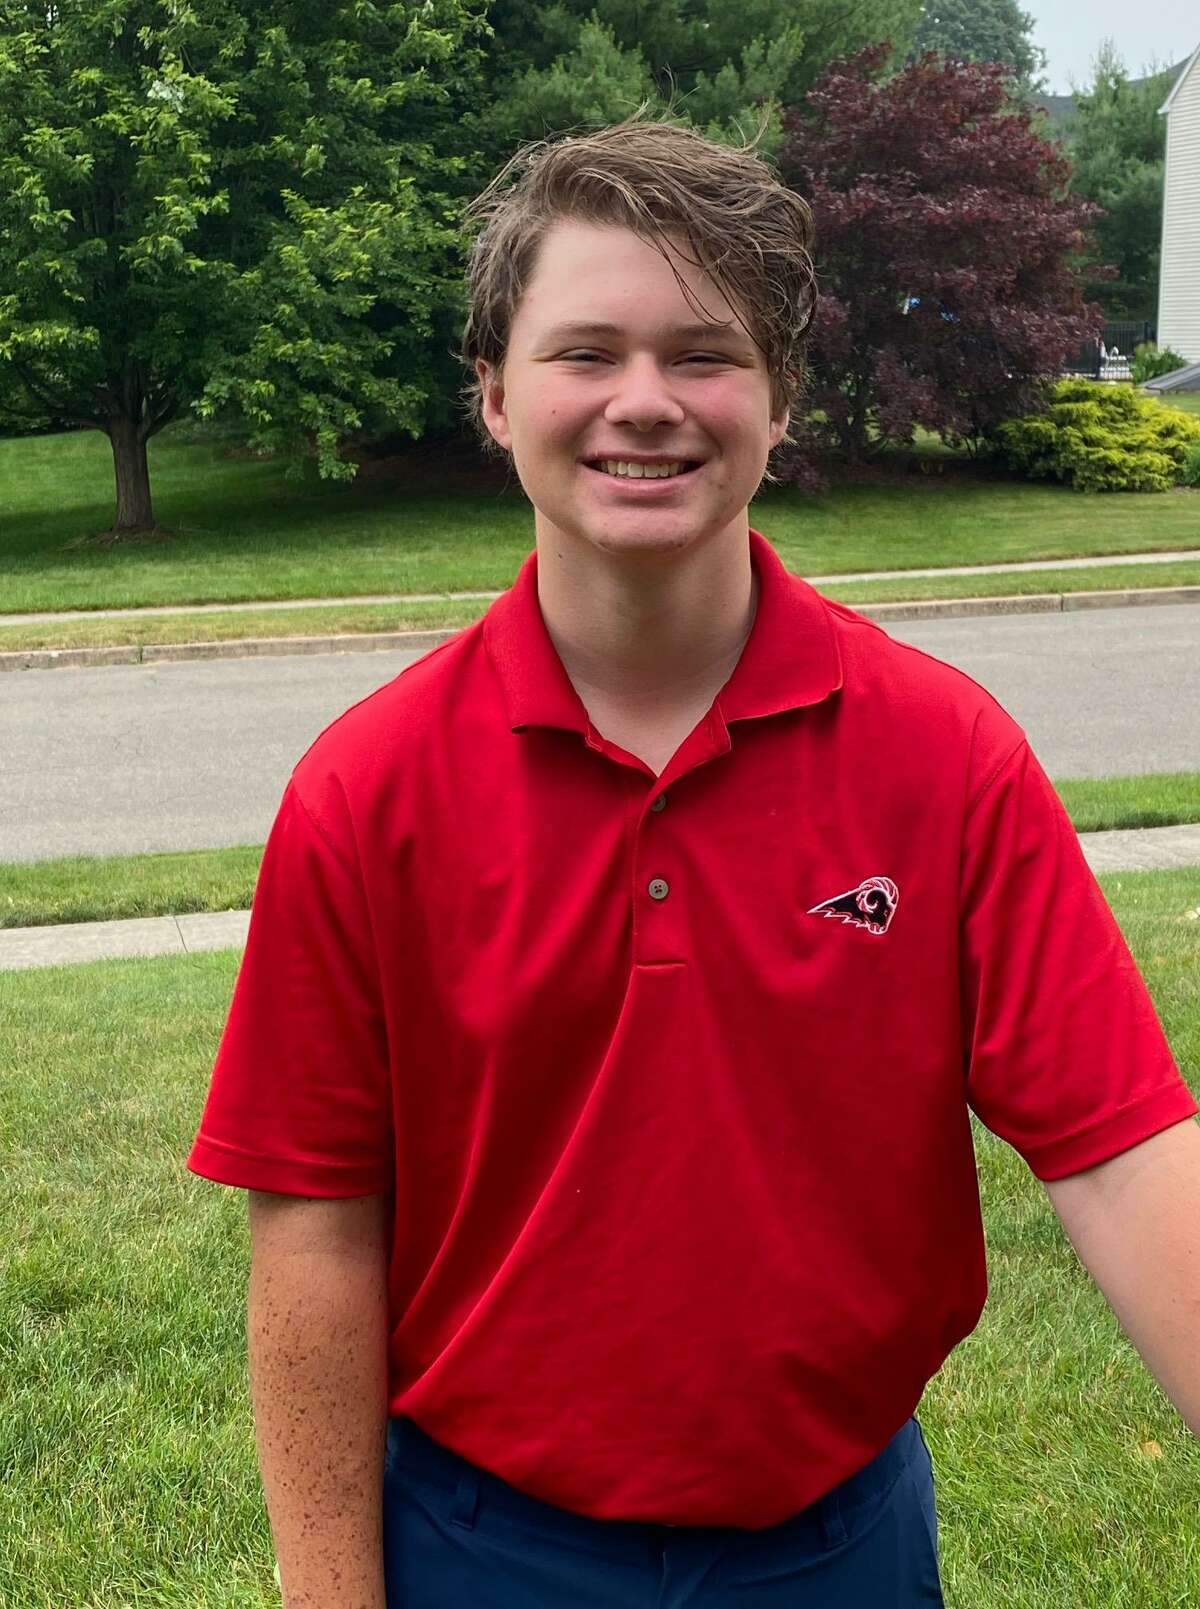 A.J. DePaolo, Cheshire golf